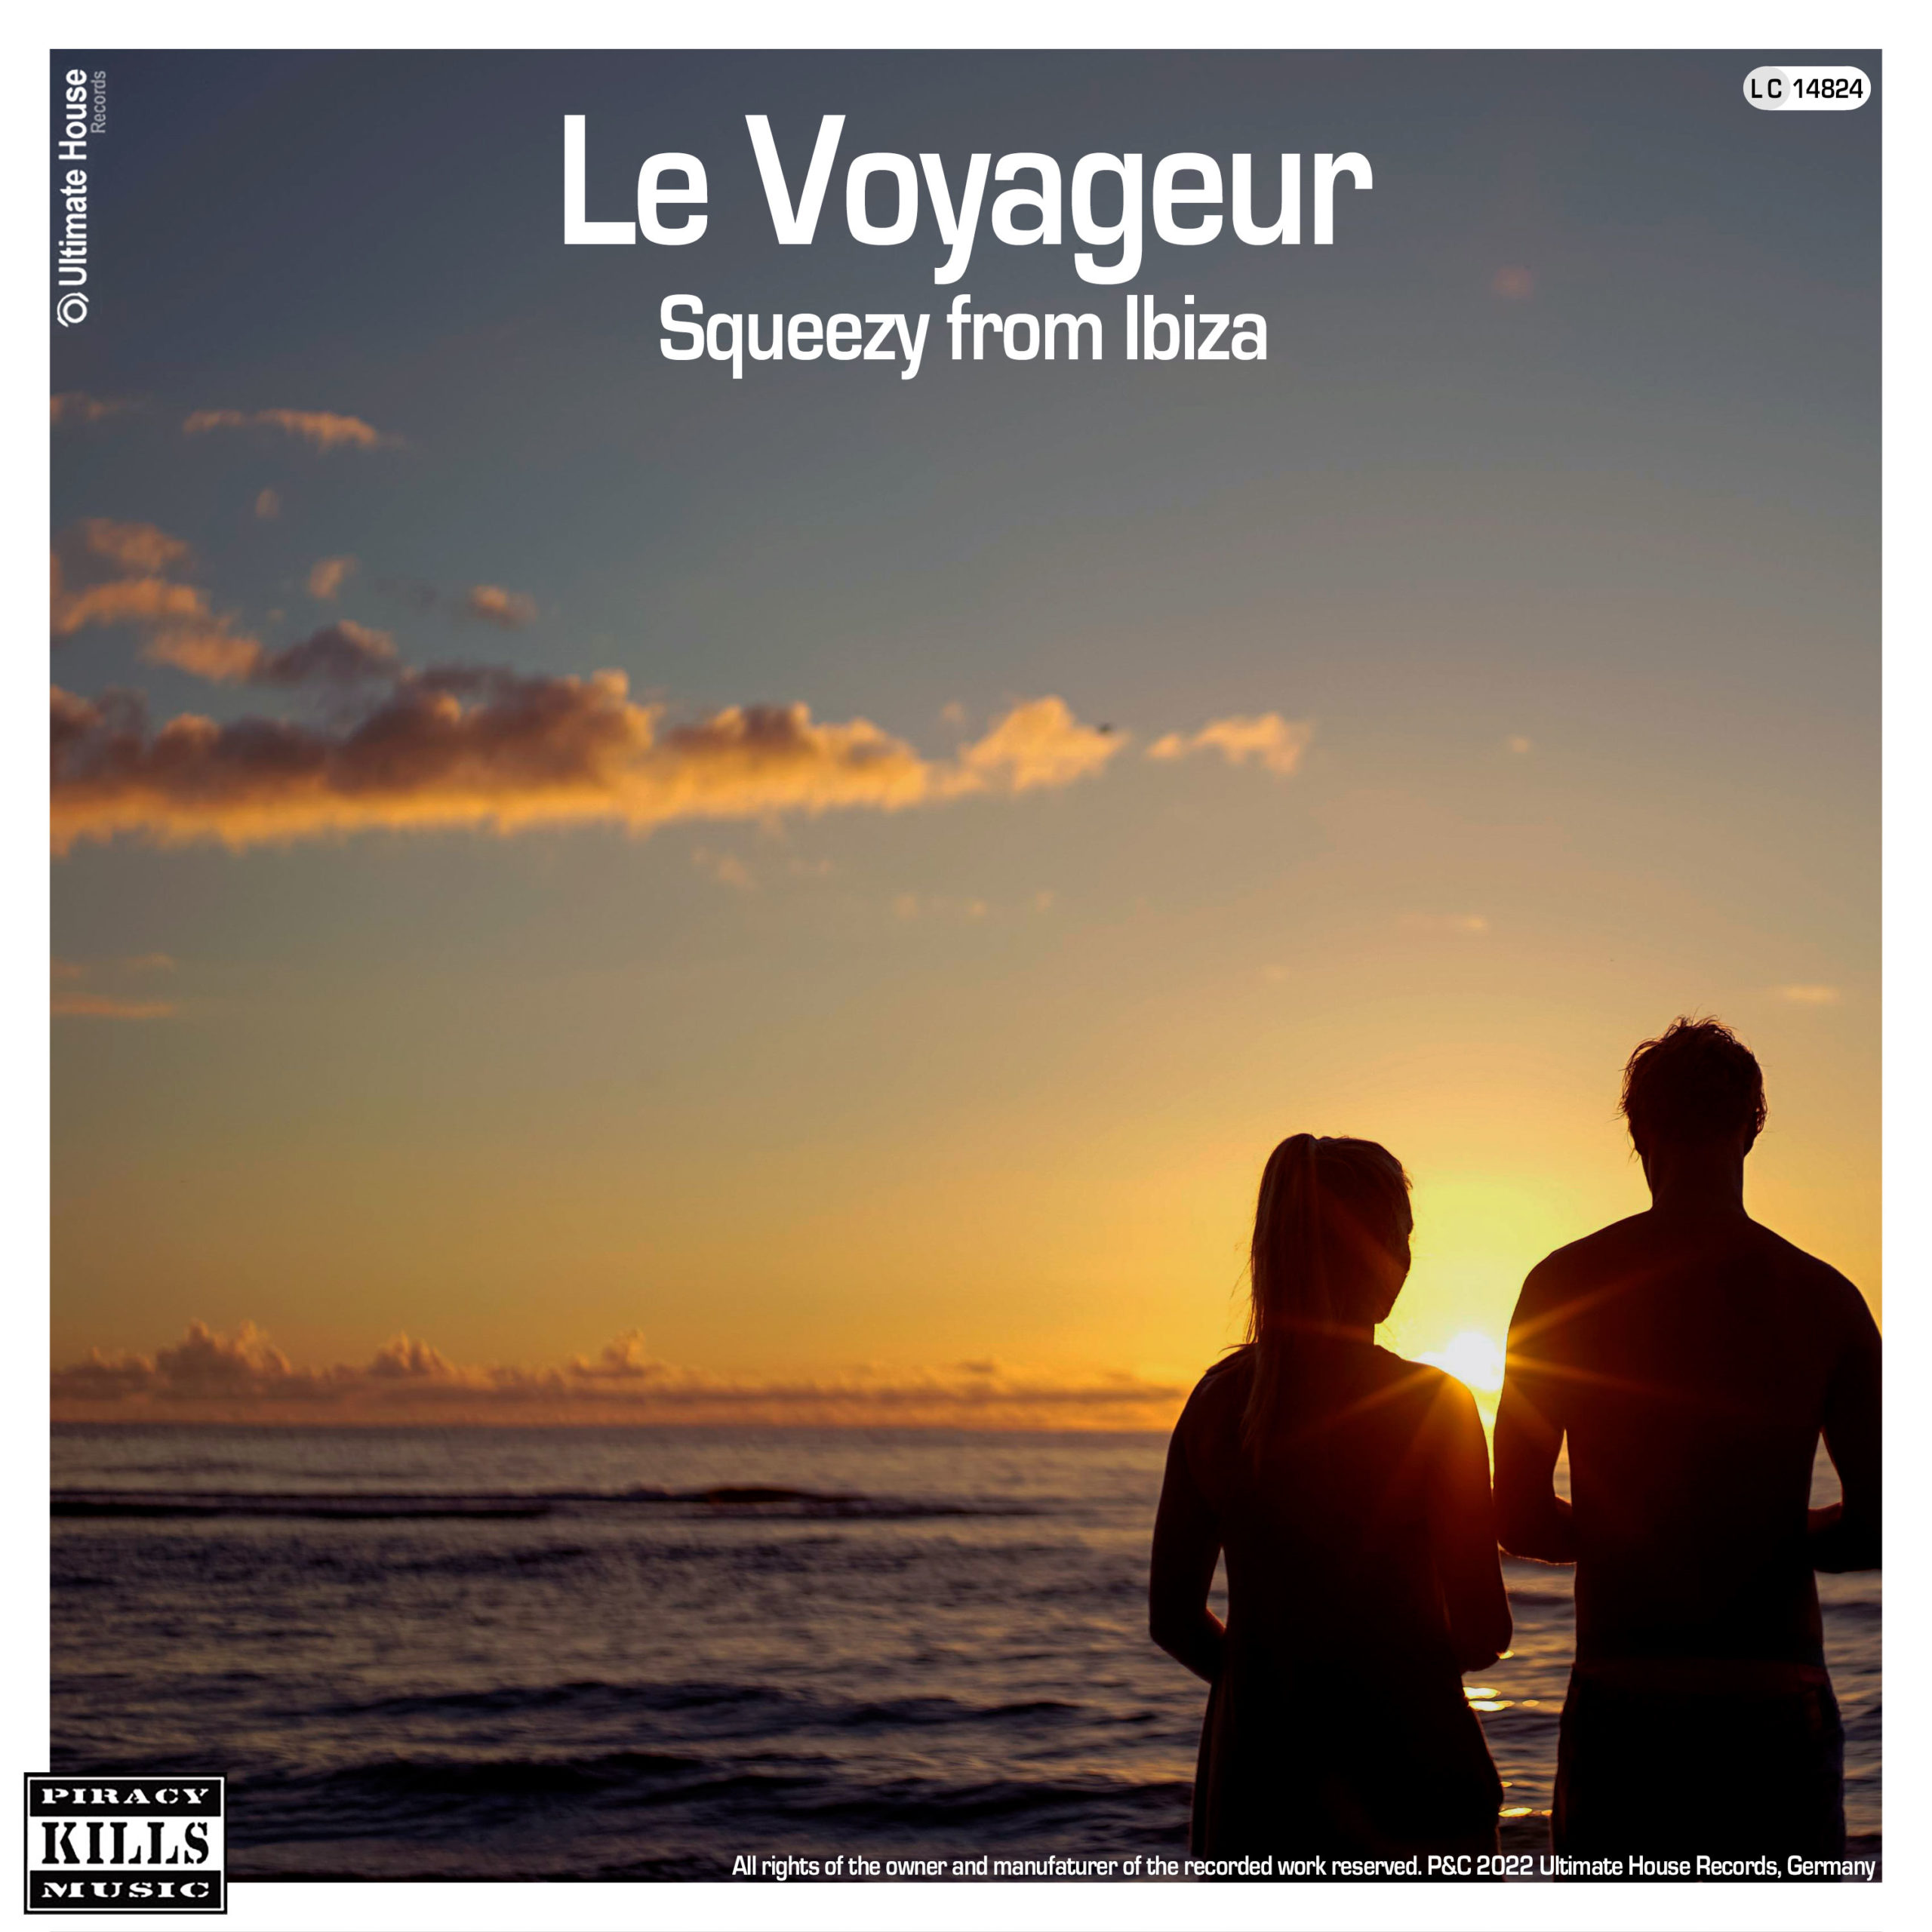 https://www.ultimate-house-records.com/wp-content/uploads/2022/08/163-Le_Voyageur-Cover_3000px_web-scaled.jpg